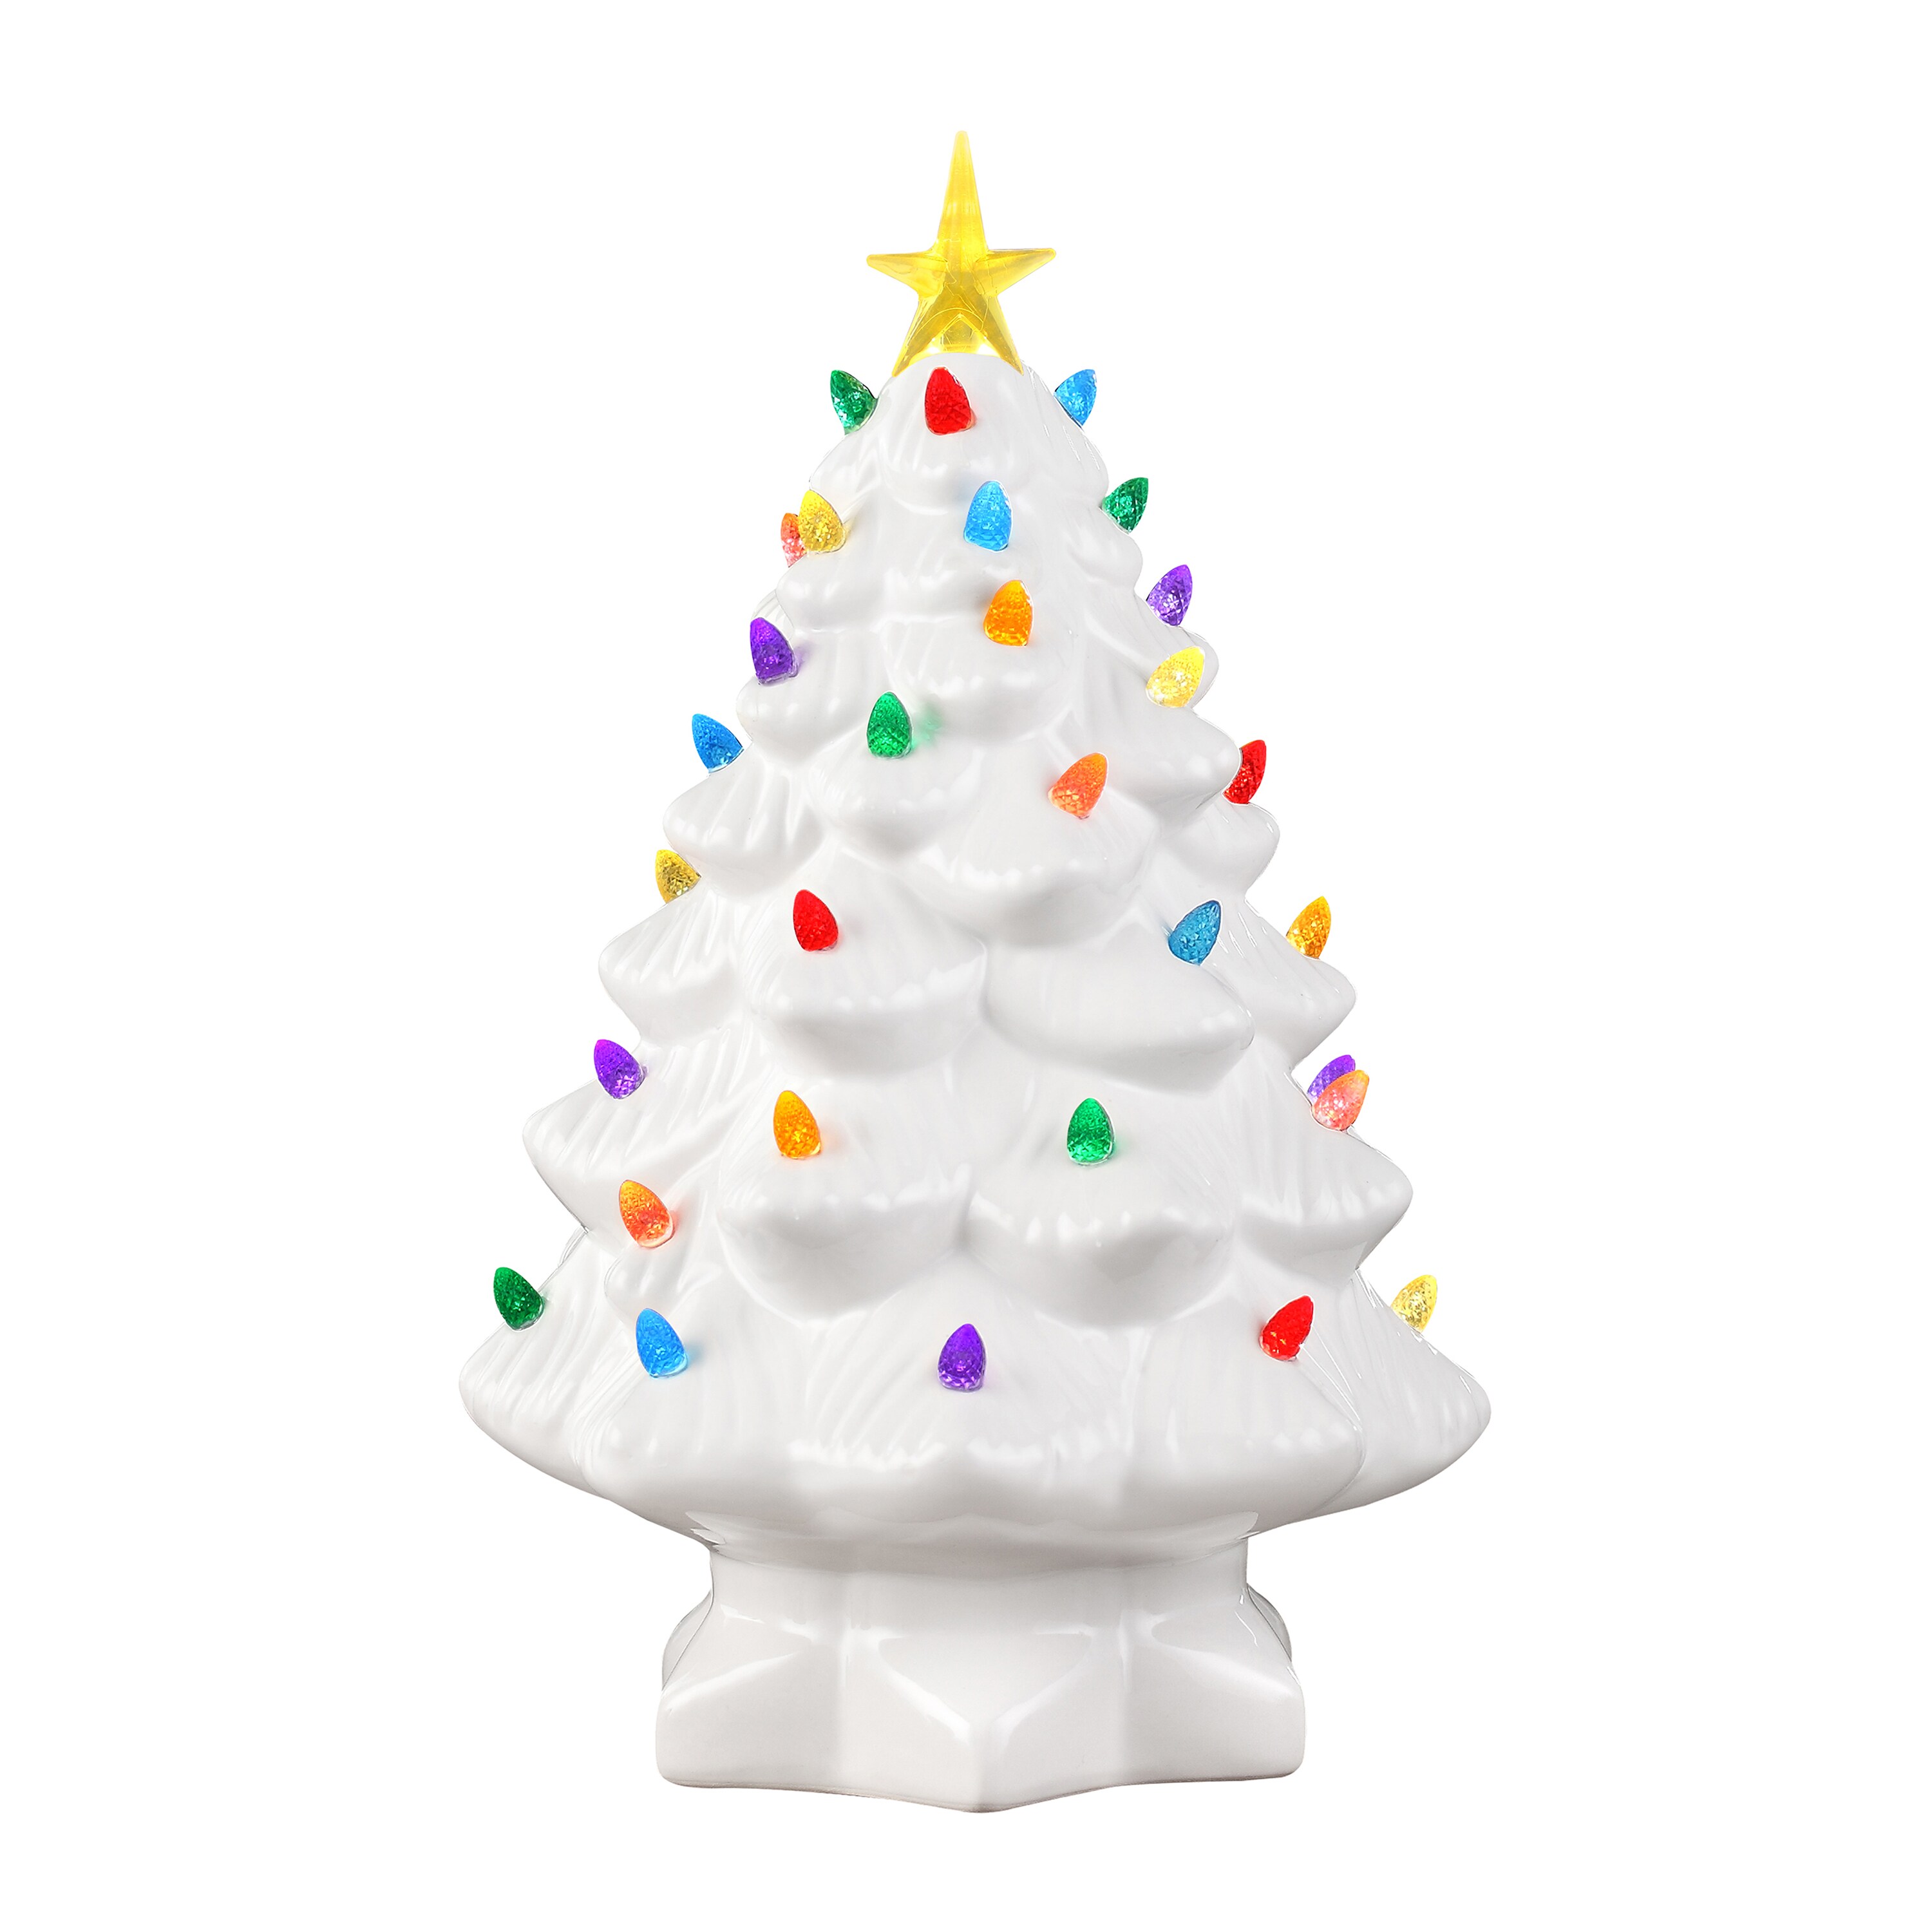 Details about   New Ceramic White Christmas Tree Lights & Glitter Holly Base 14.5" Allen & Roth 